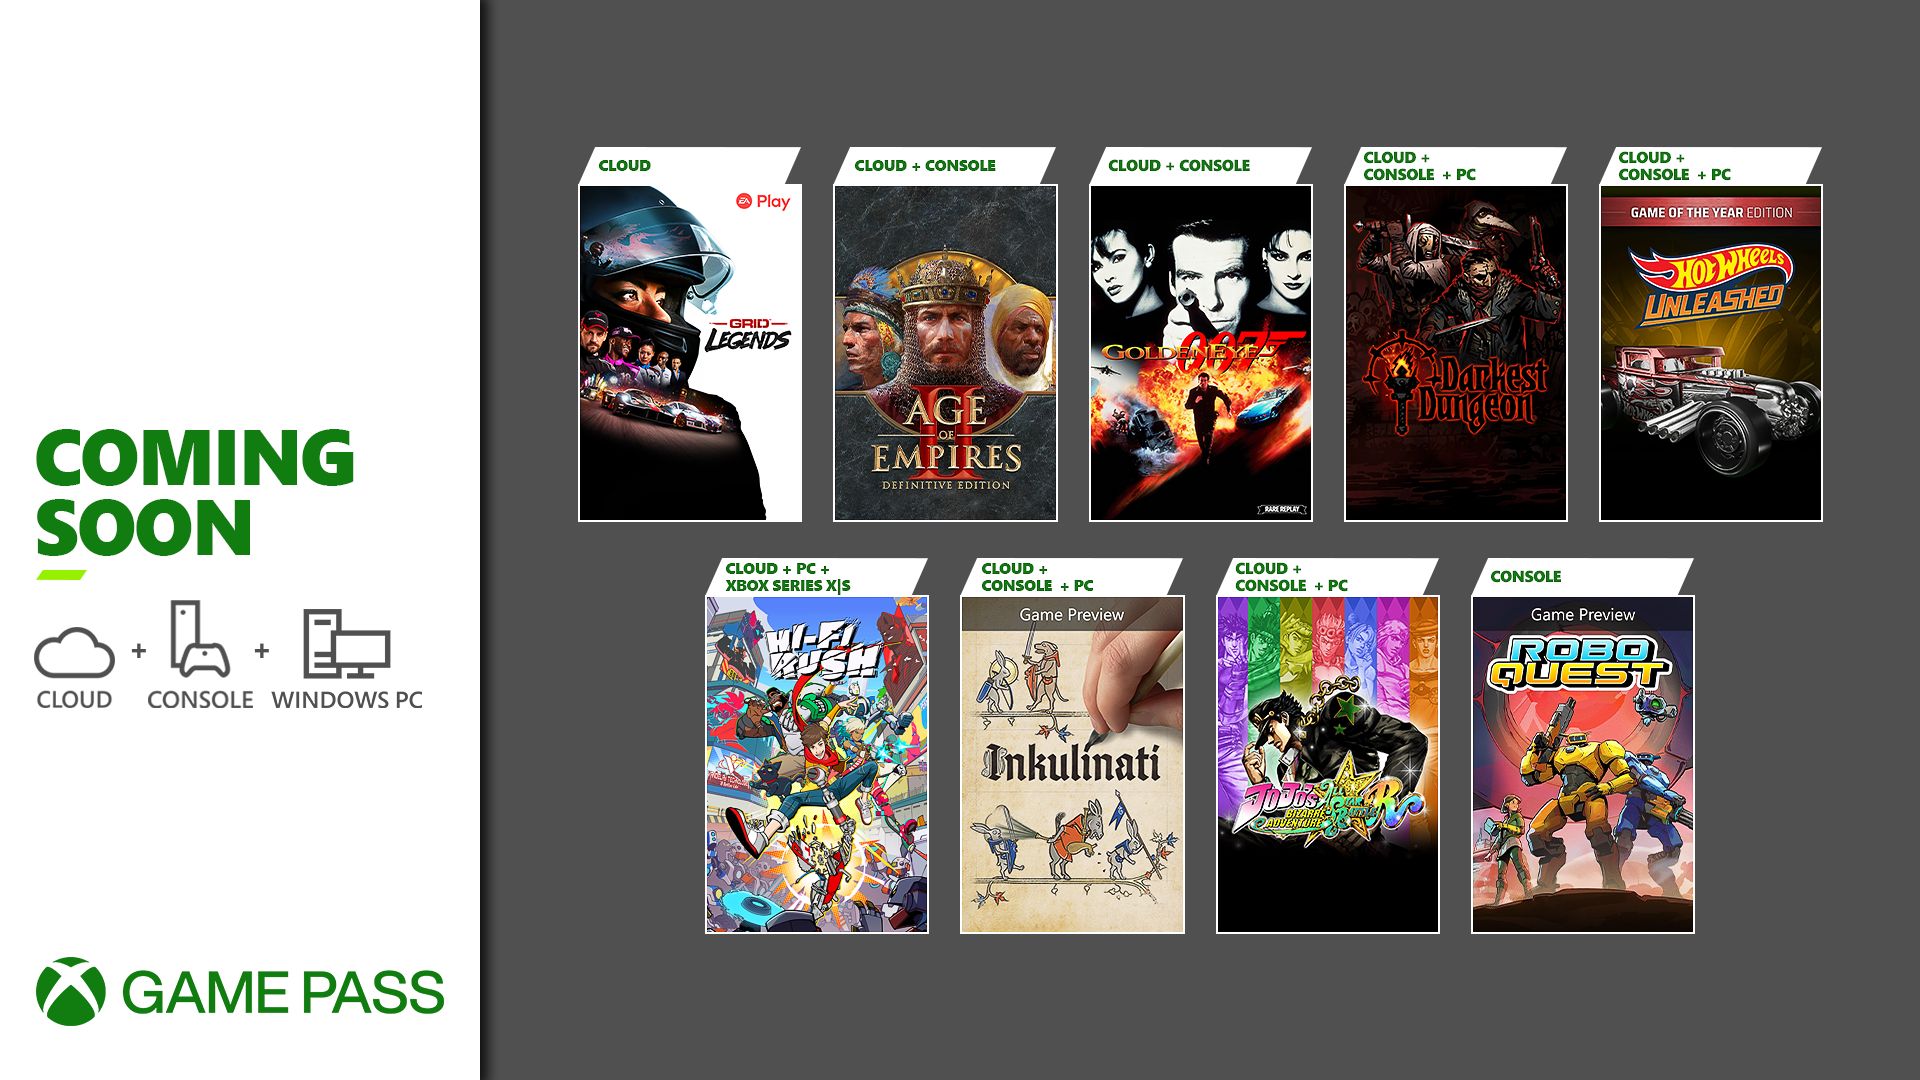 Coming to Xbox Game Pass: Hi-Fi Rush, GoldenEye 007, Age of Empires II: Definitive Edition, and More